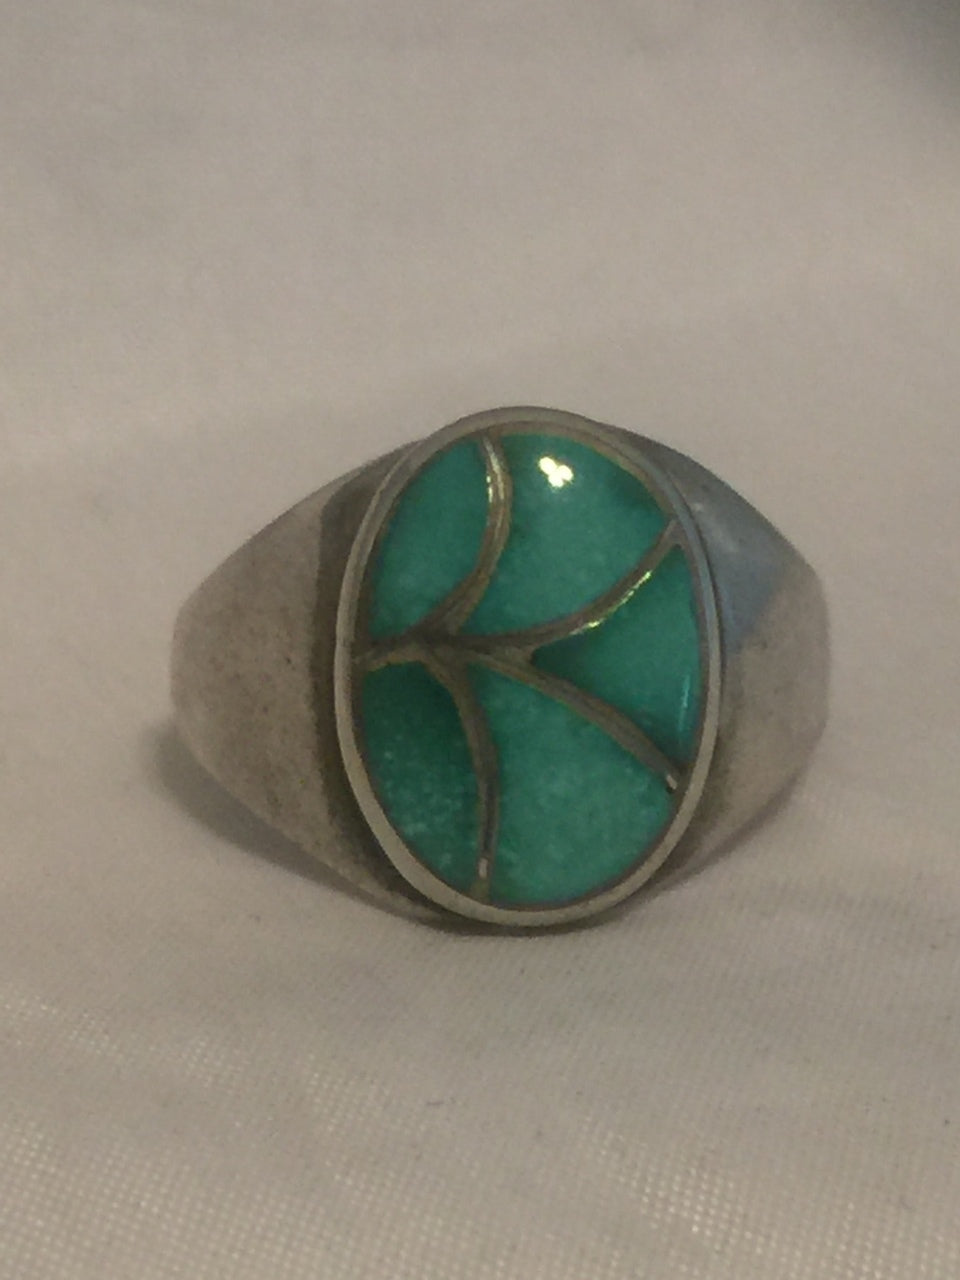 Vintage Sterling Silver Southwest Turquoise Tribal Ring  Sign ELB  Size 11 Weight  7.9g